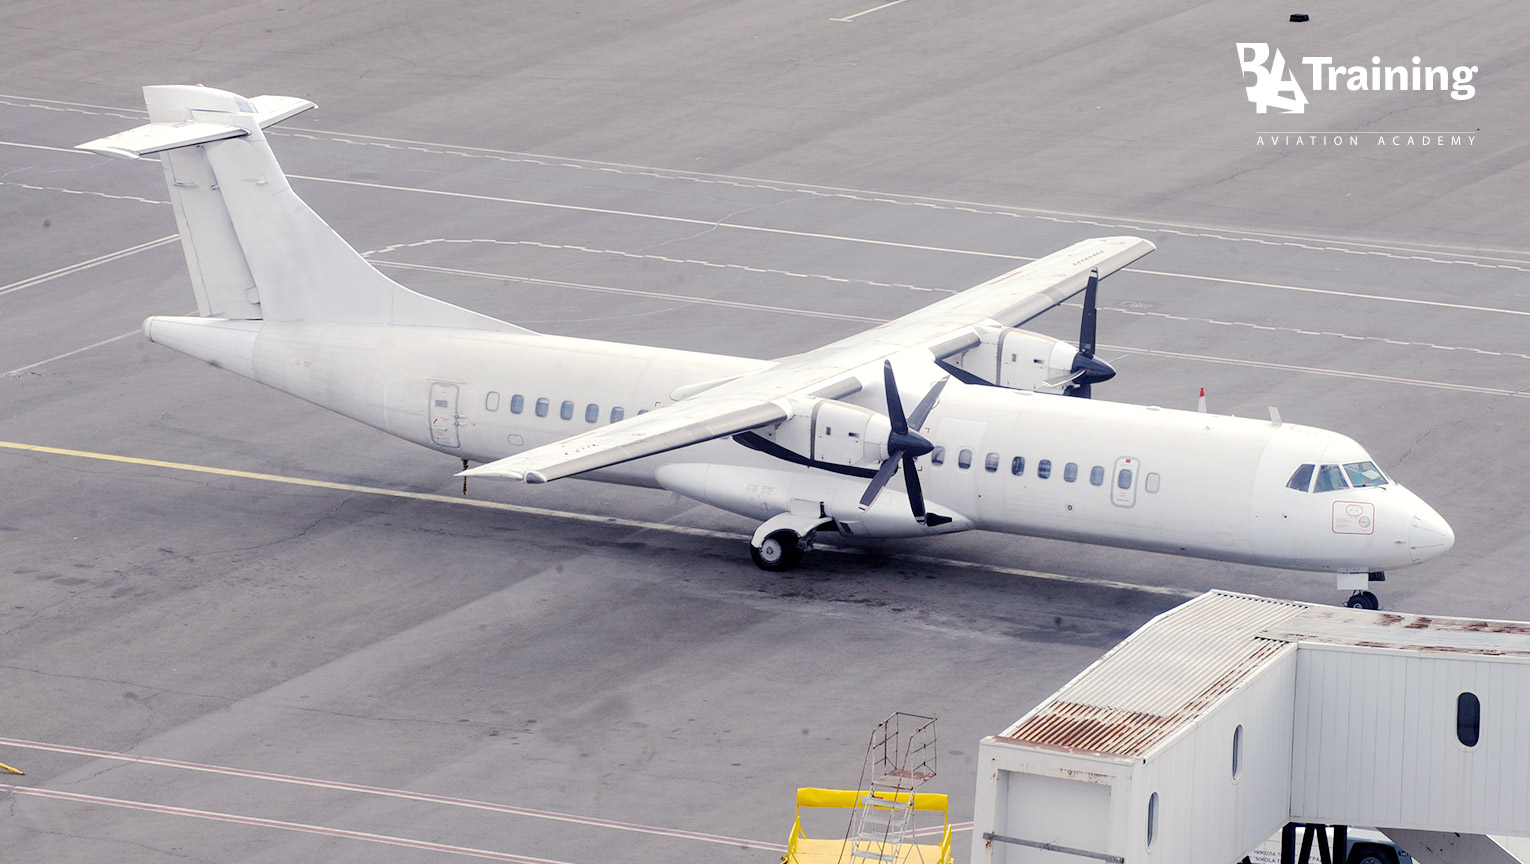 BAA Training starts to provide ATR 42/72 type rating training for Tanzanian airlines